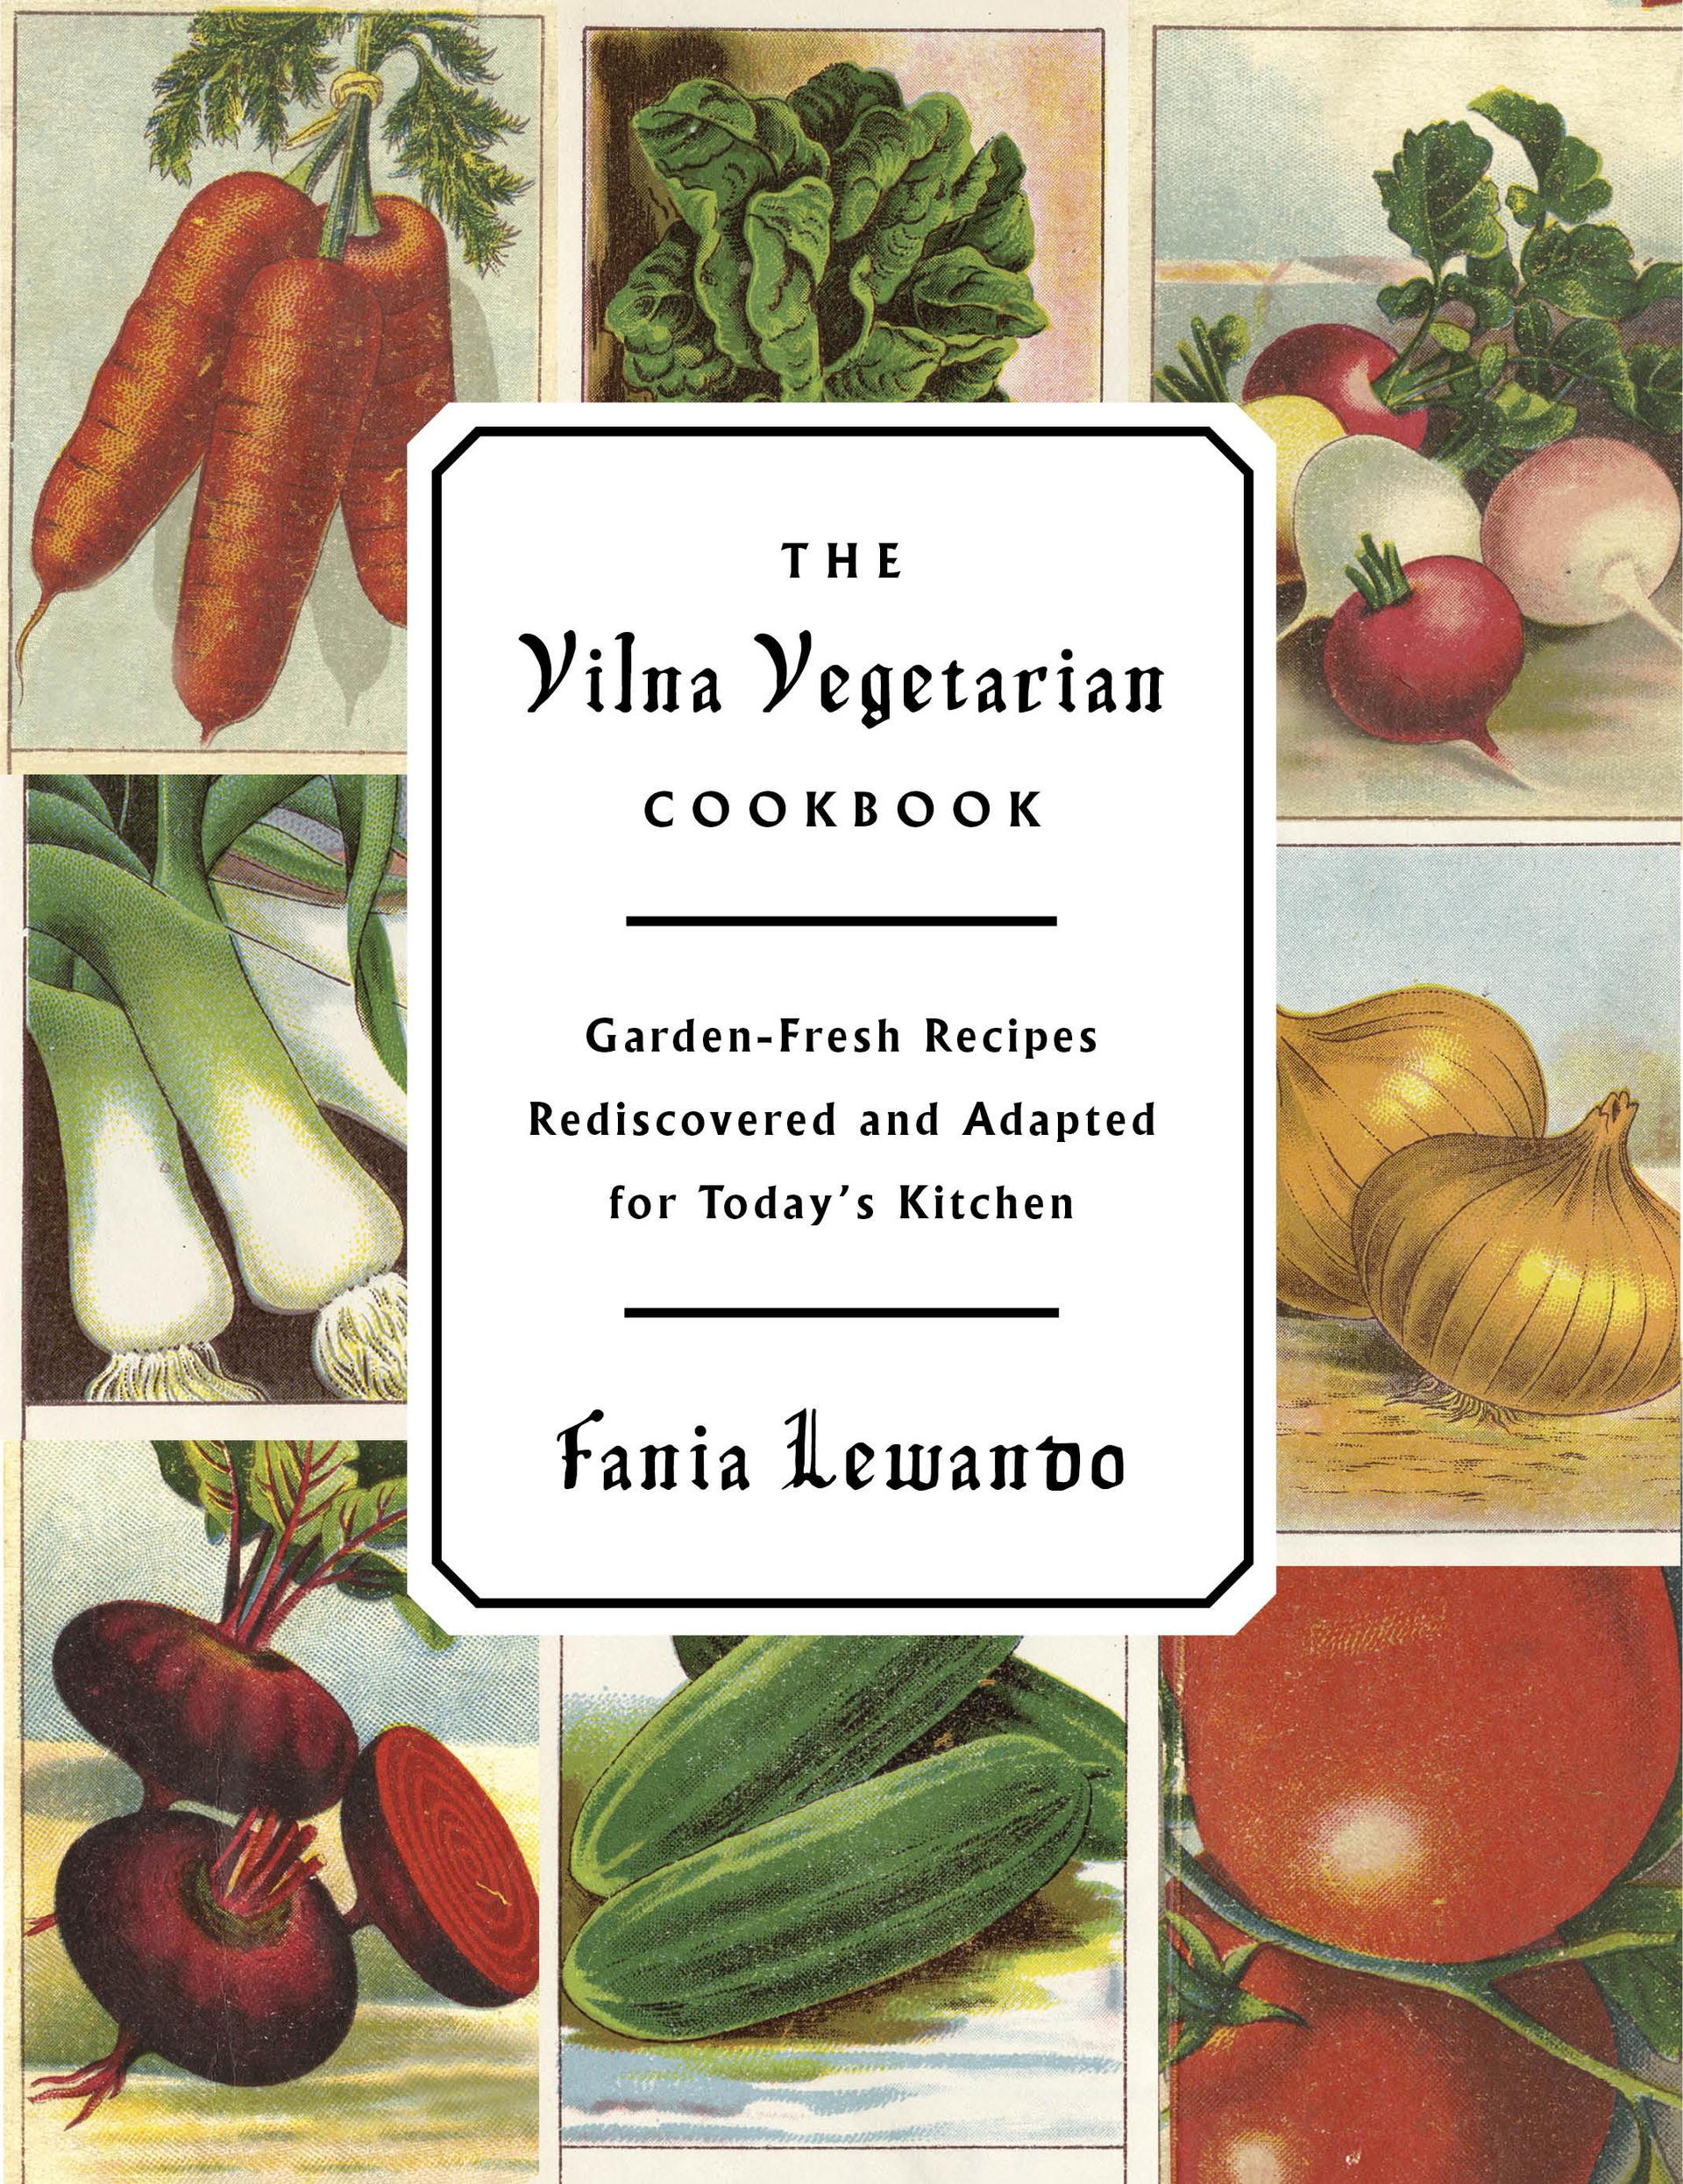 Fania Lewando, a restaurant owner in Poland before World War II, wrote a Yiddish cookbook that reveals a vibrant Jewish vegetarian tradition.